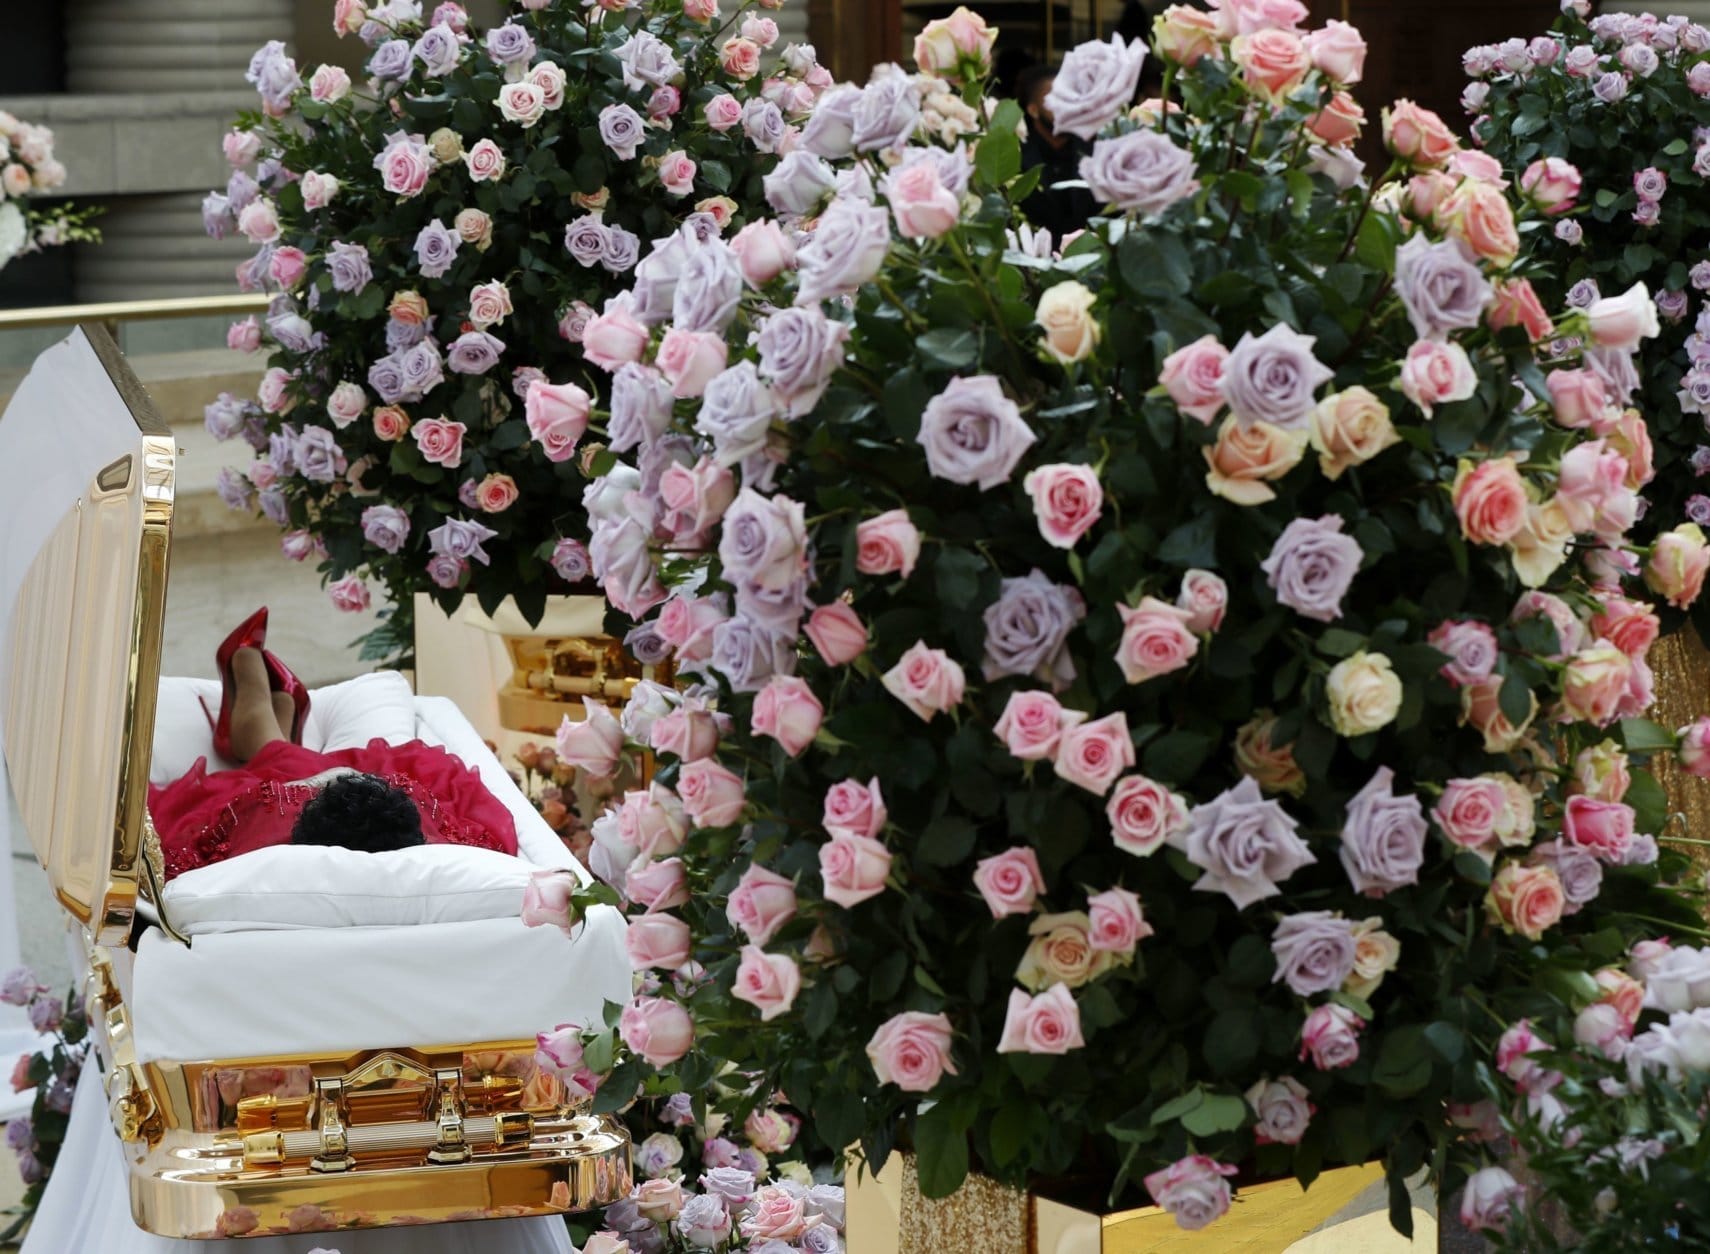 Aretha Franklin lies in her casket at the Charles H. Wright Museum of African American History in Detroit during a public visitation on Aug. 28, 2018. Franklin died on Aug. 16 of pancreatic cancer at the age of 76. (AP Photo/Paul Sancya, Pool)